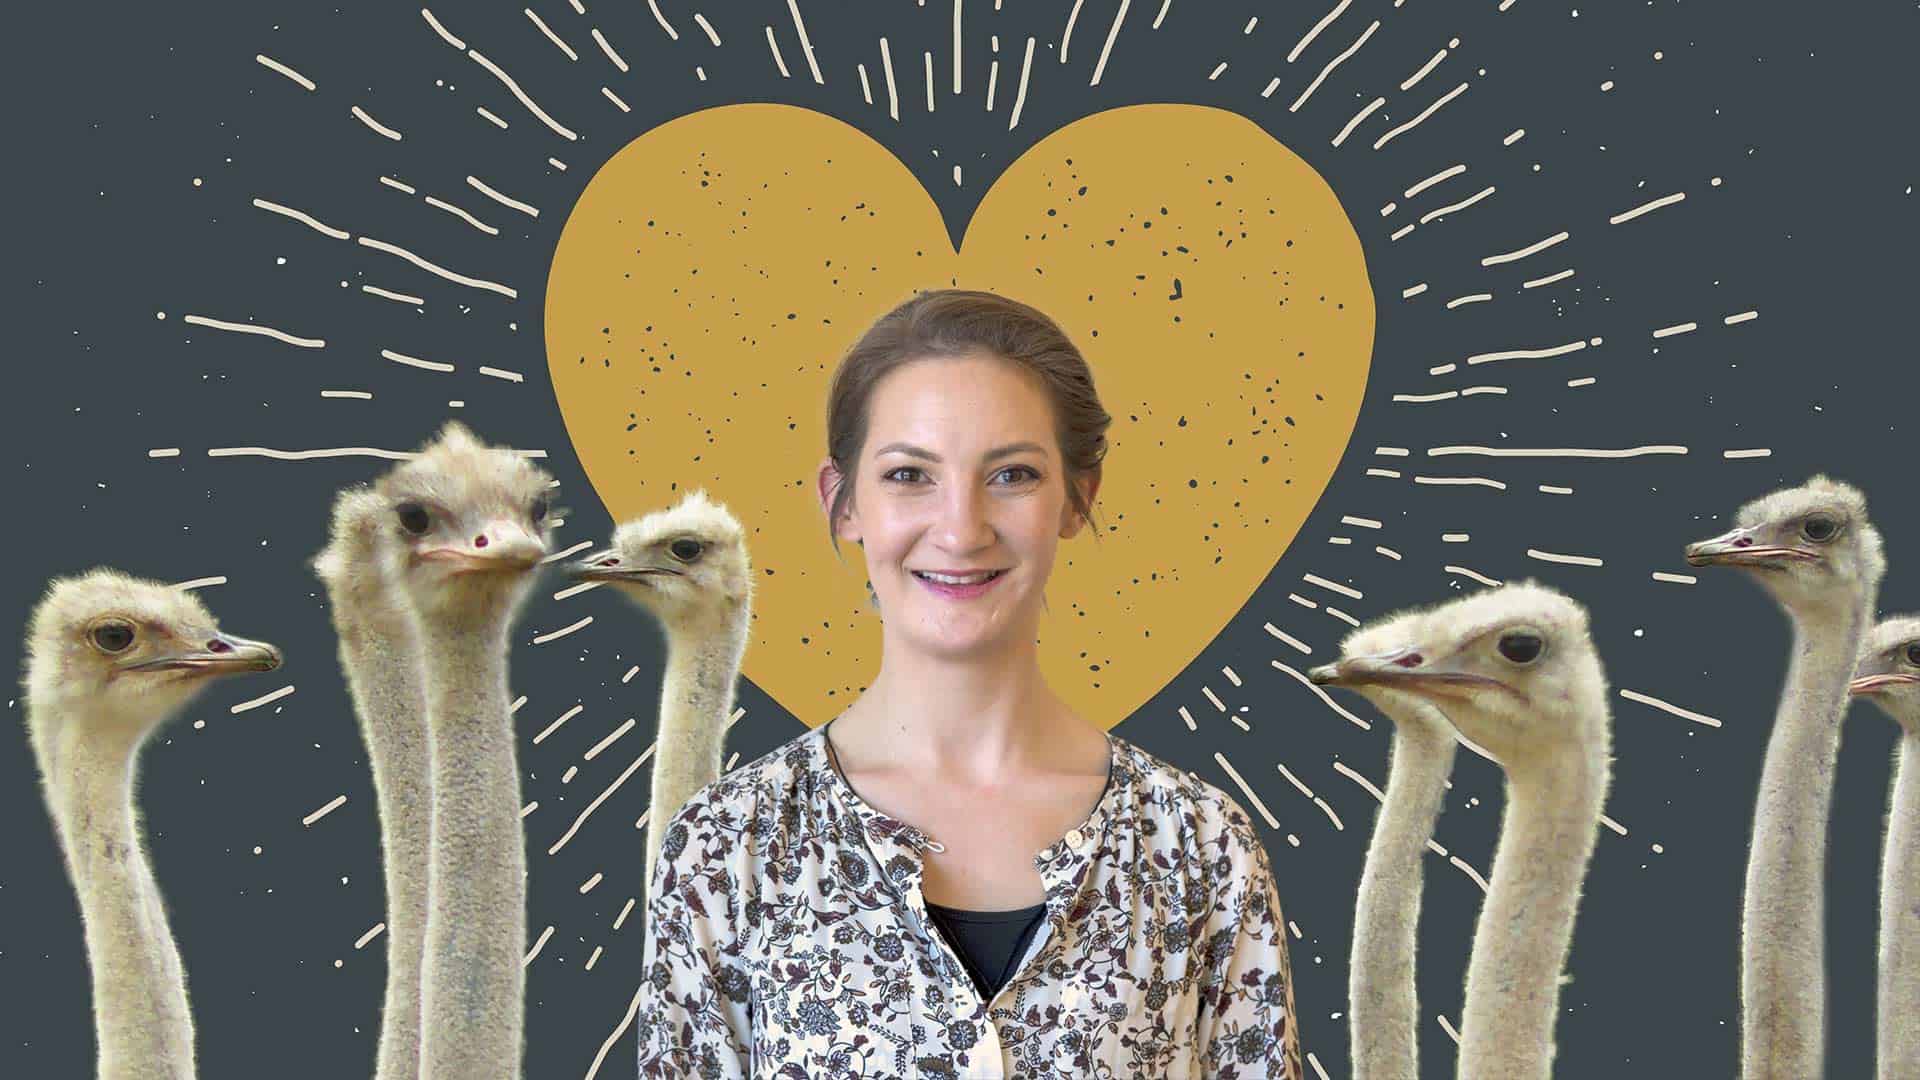 Partners, ostriches, and everything in between, Jesi will be there for you